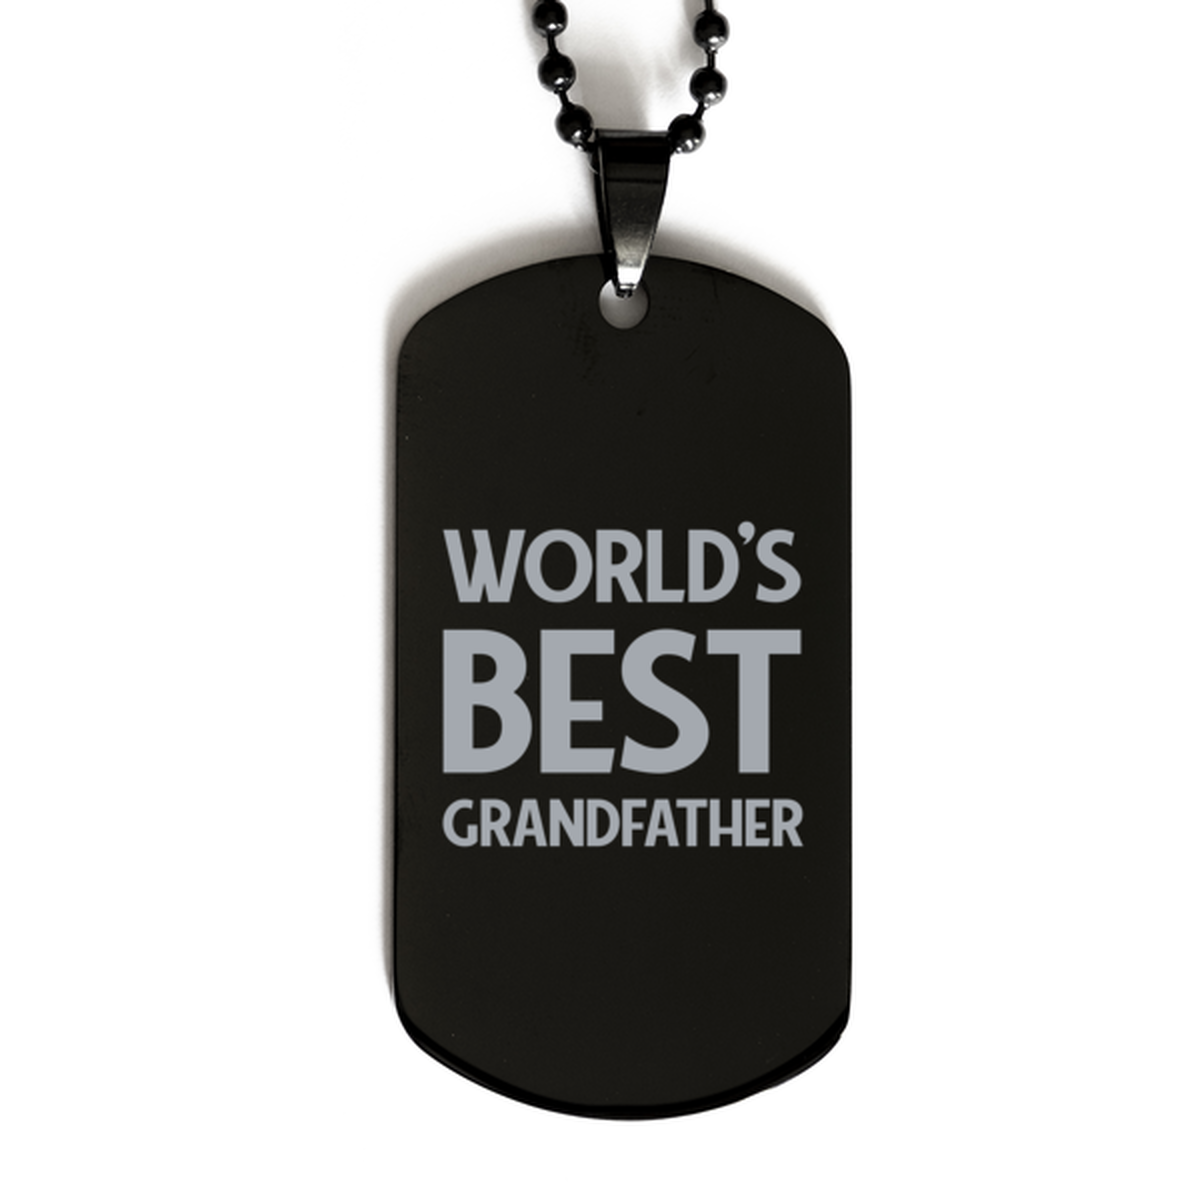 Worlds Best Grandfather Gifts, Funny Black Engraved Dog Tag For Grandfather, Birthday Presents For Men